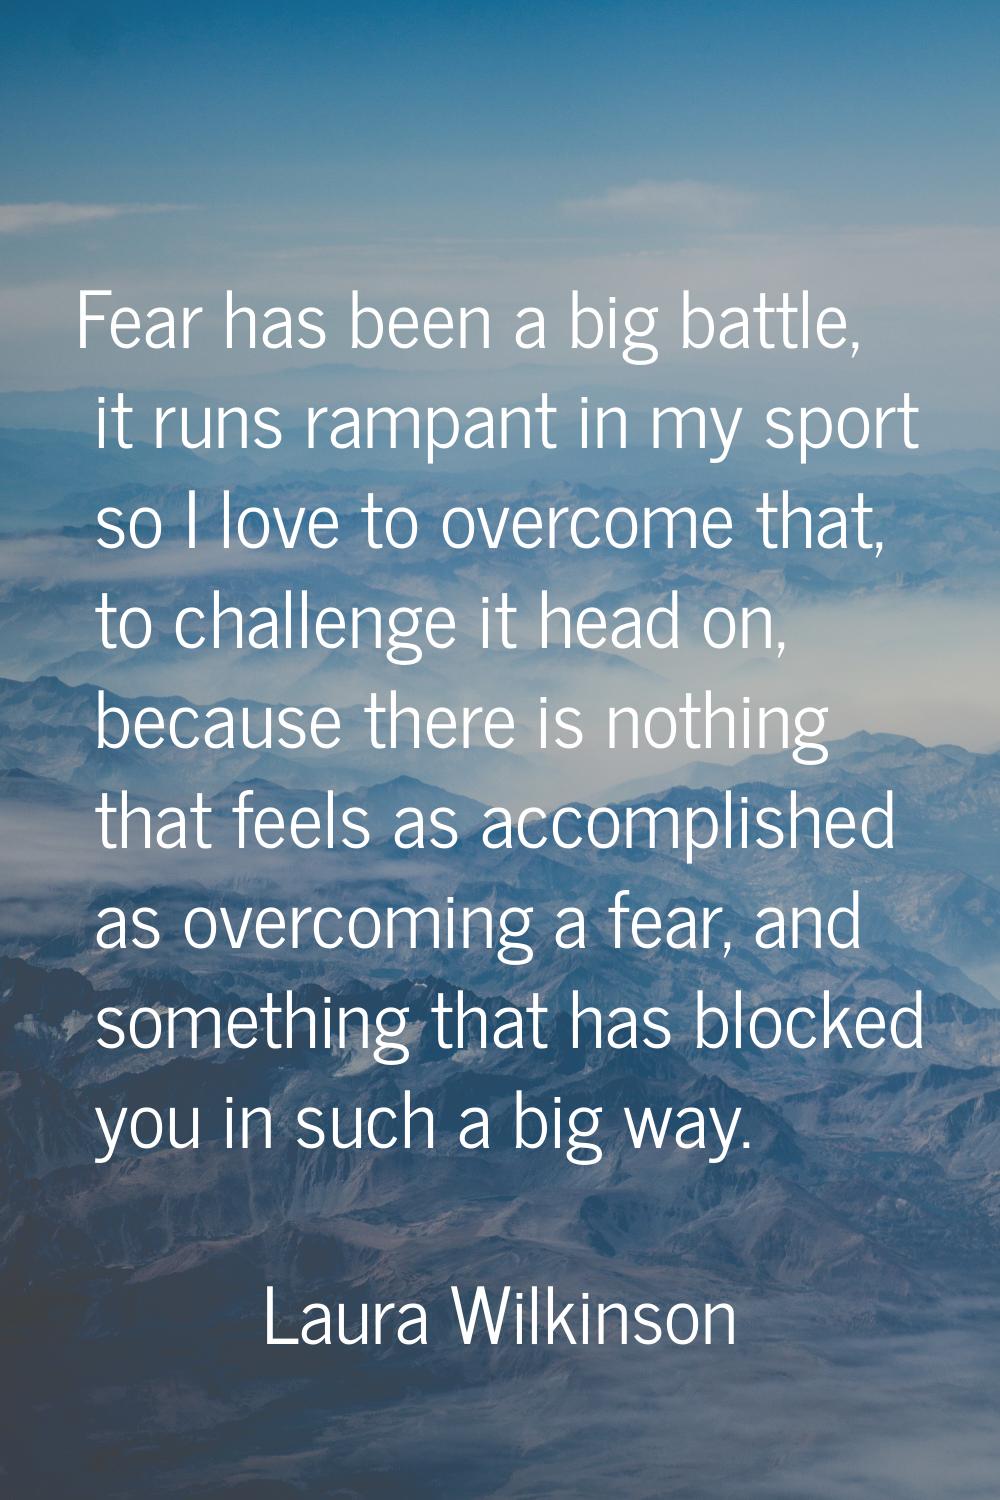 Fear has been a big battle, it runs rampant in my sport so I love to overcome that, to challenge it